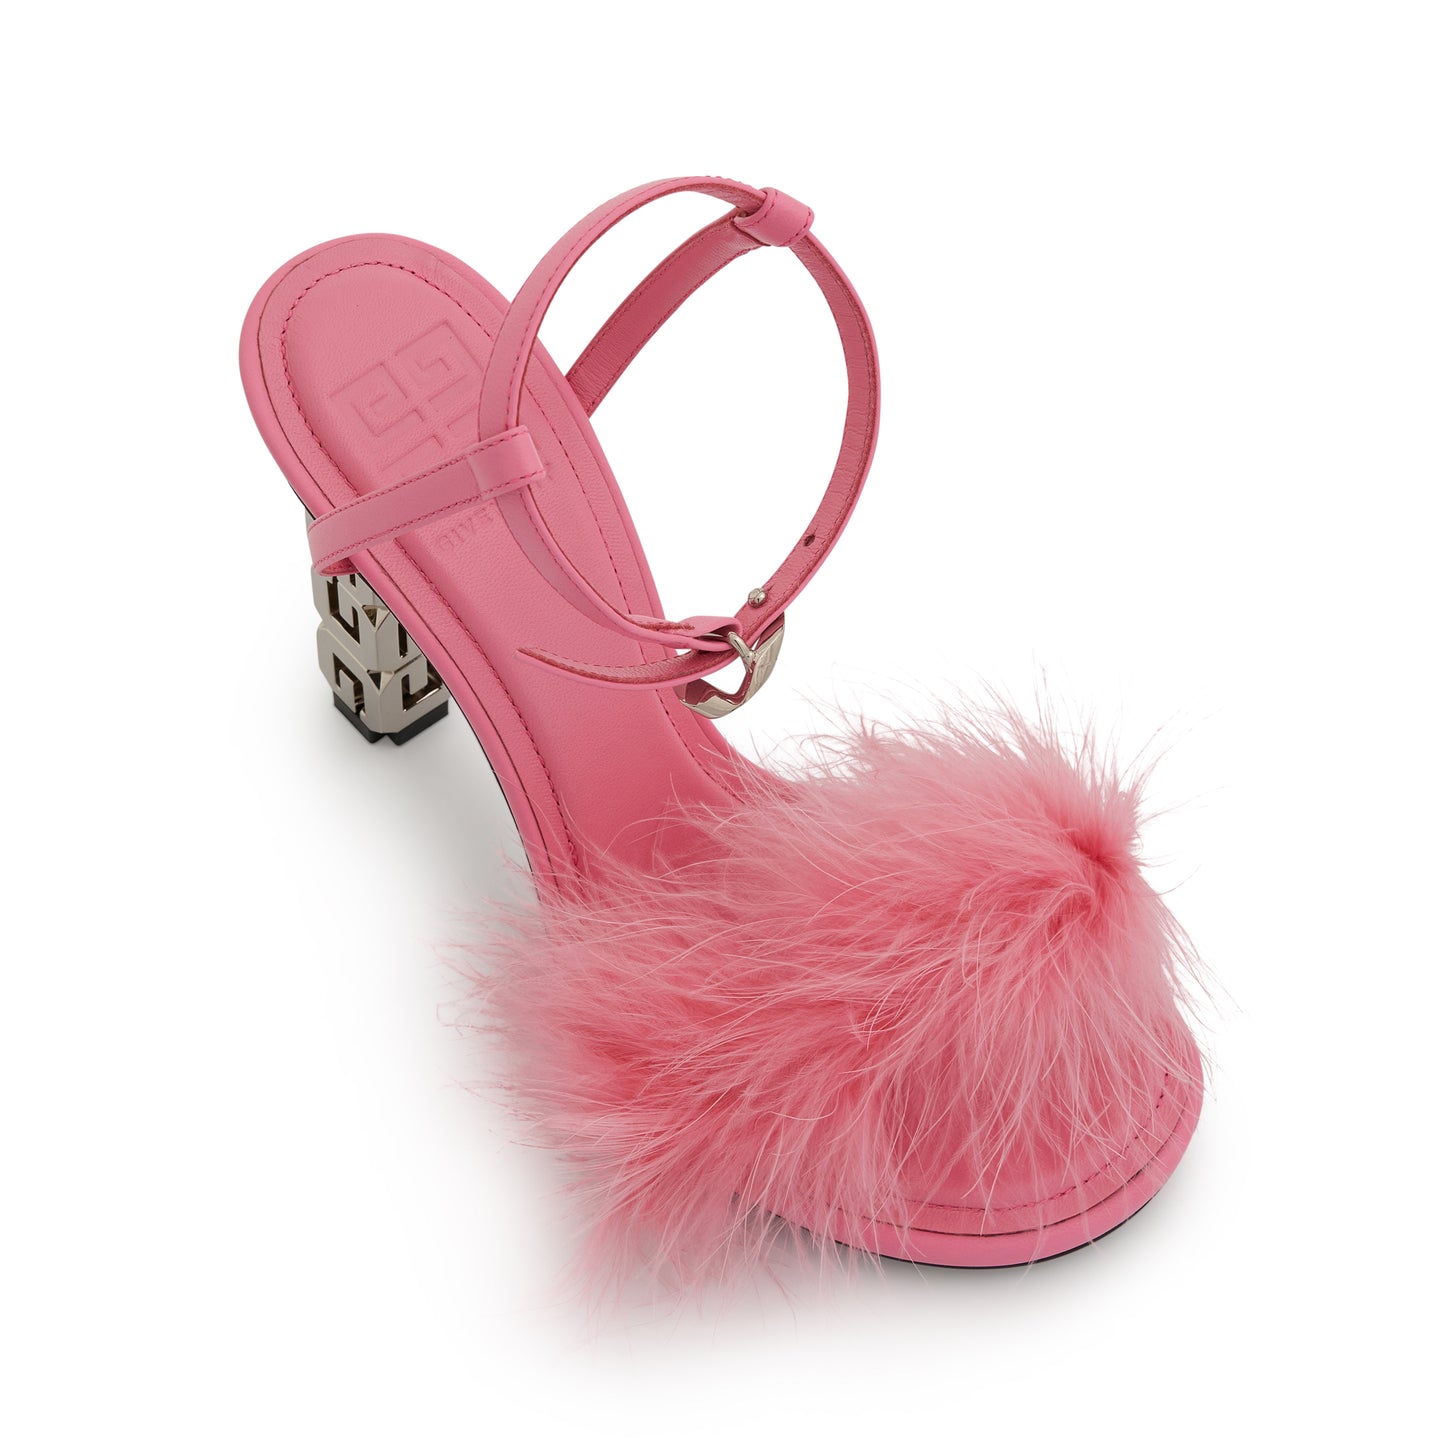 G Cube Sandal 105 with Leather & Feathers in Bright Pink